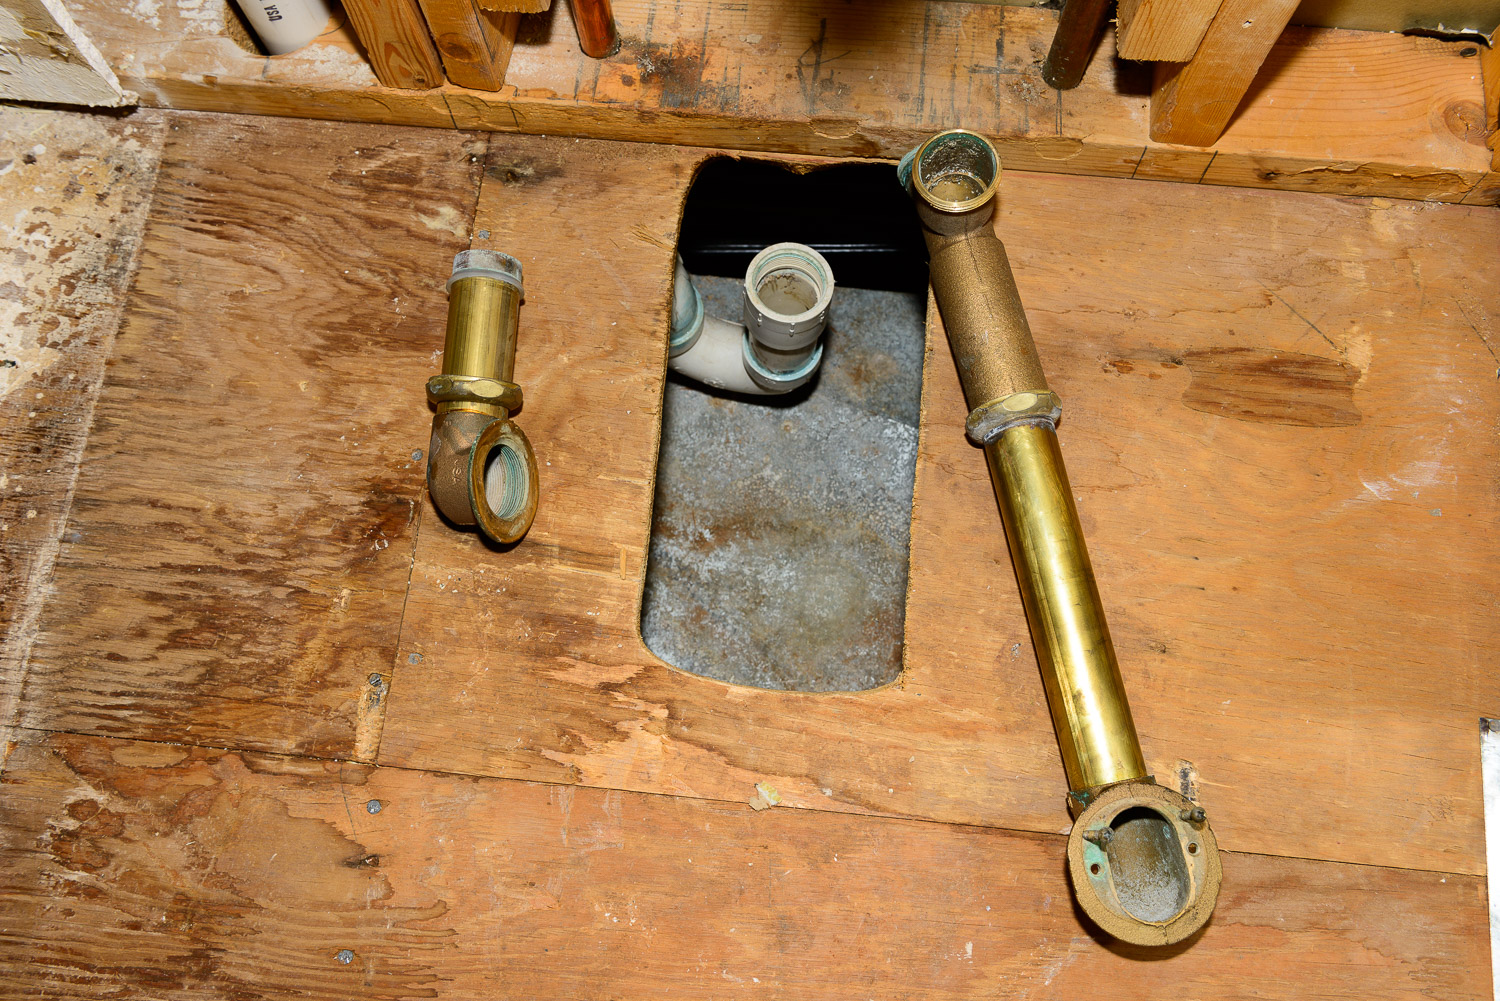 The P trap and the bathtub drain assembly.